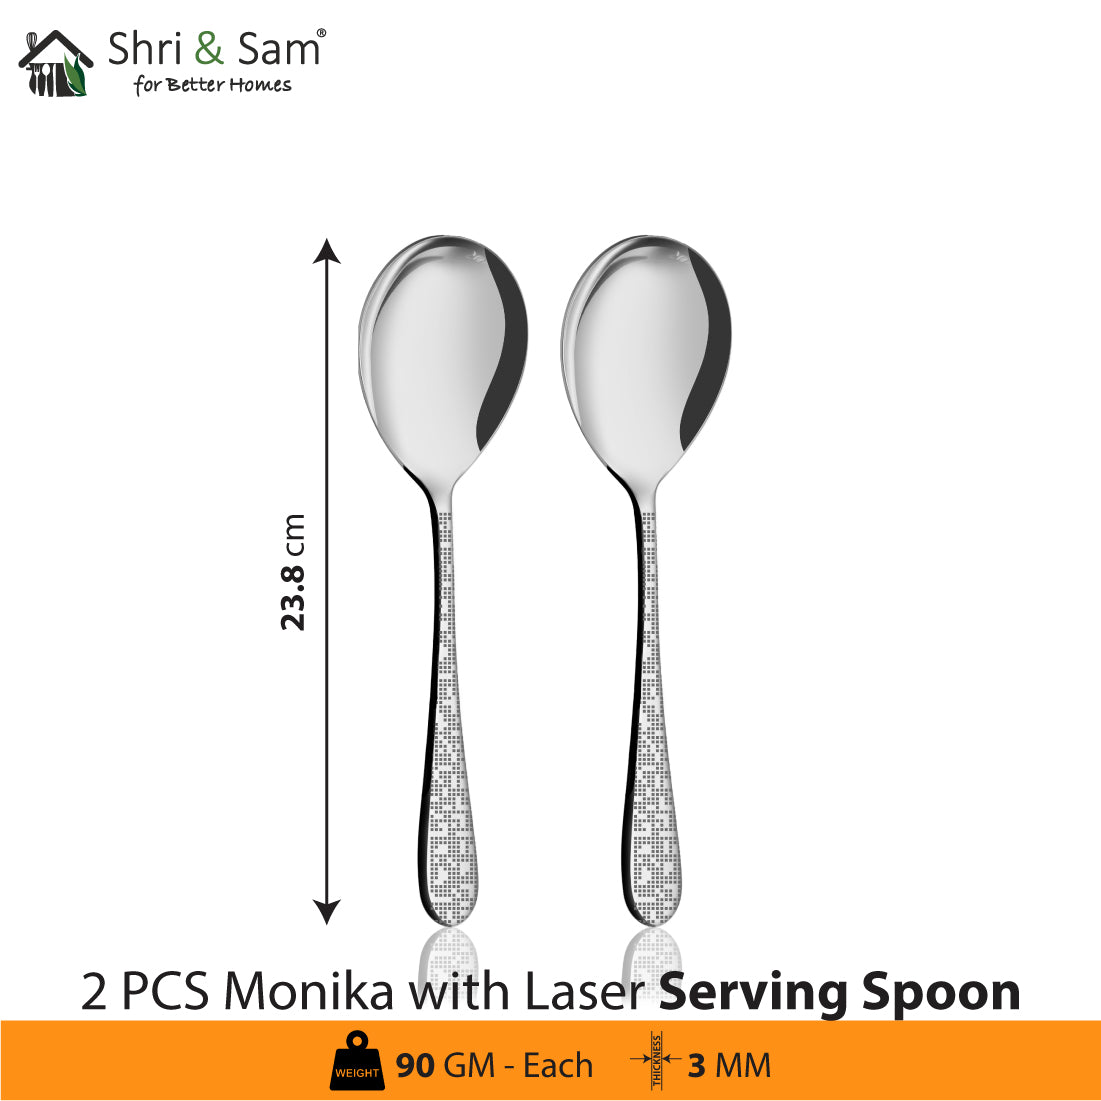 Stainless Steel Cutlery with Laser Monika